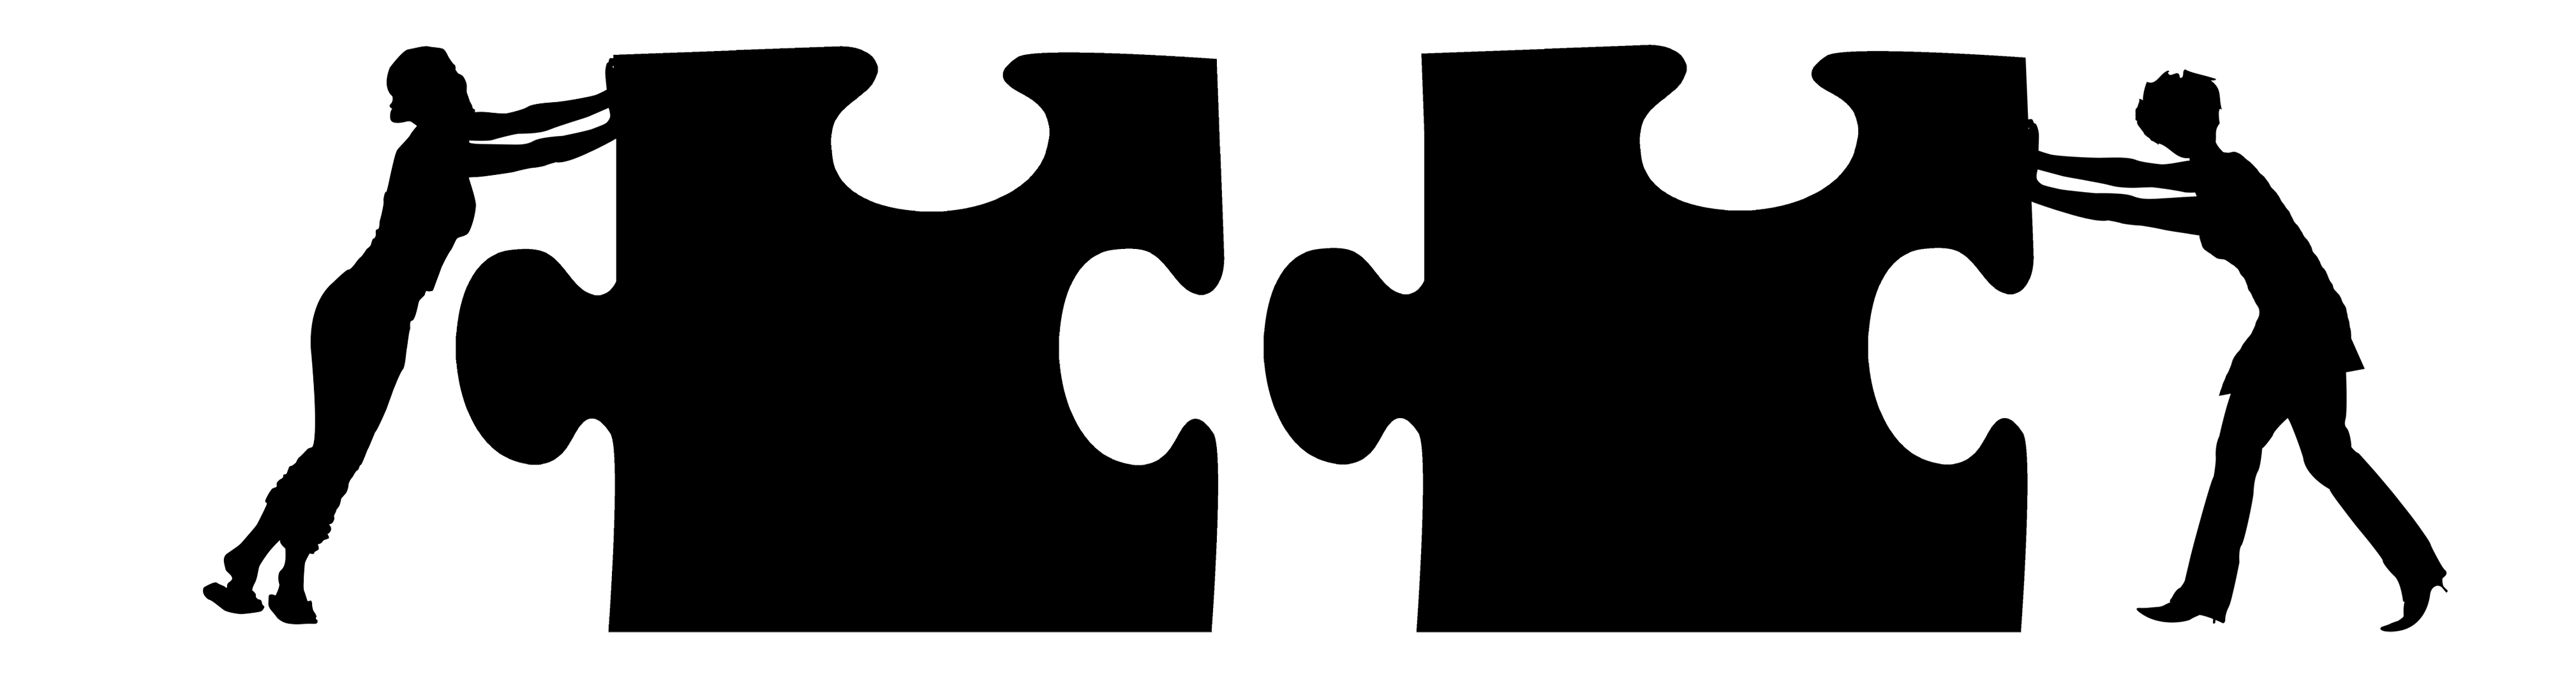 leadership clipart puzzle